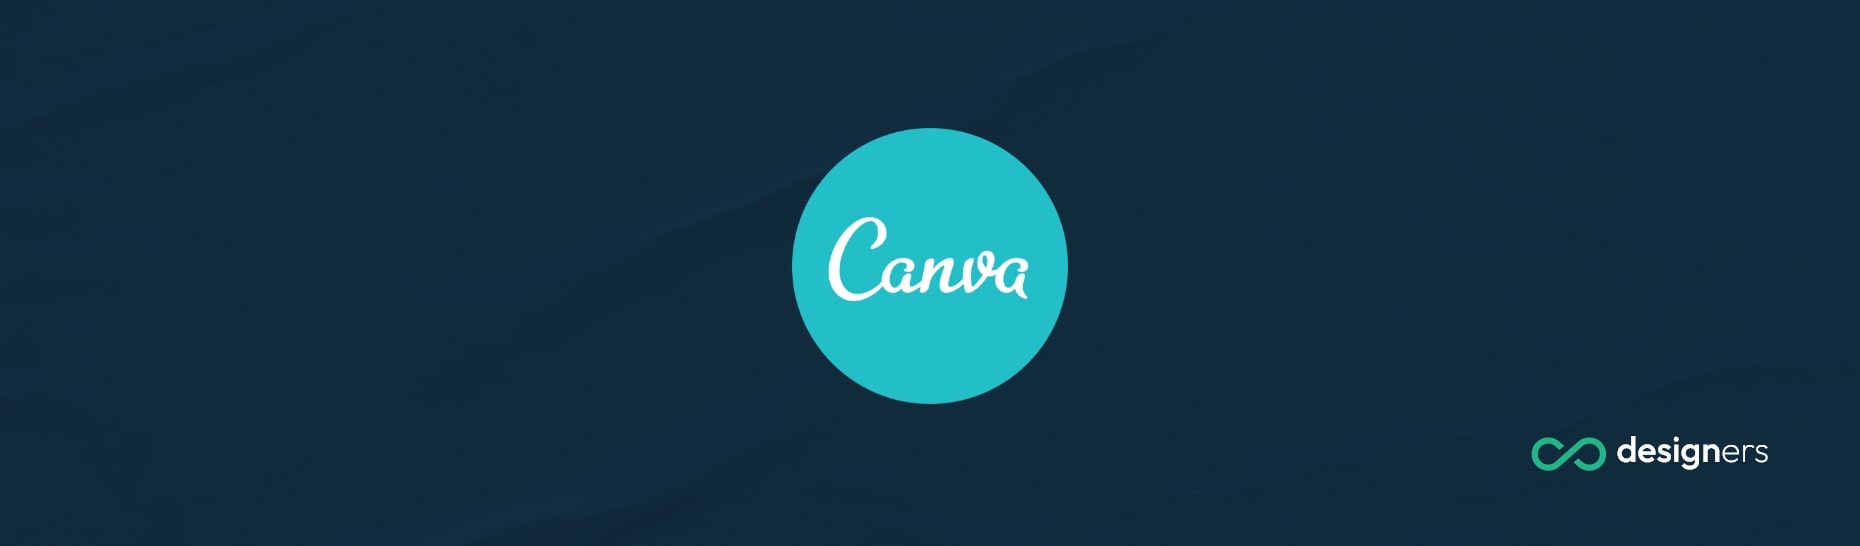 Who Is Canva Target Audience?